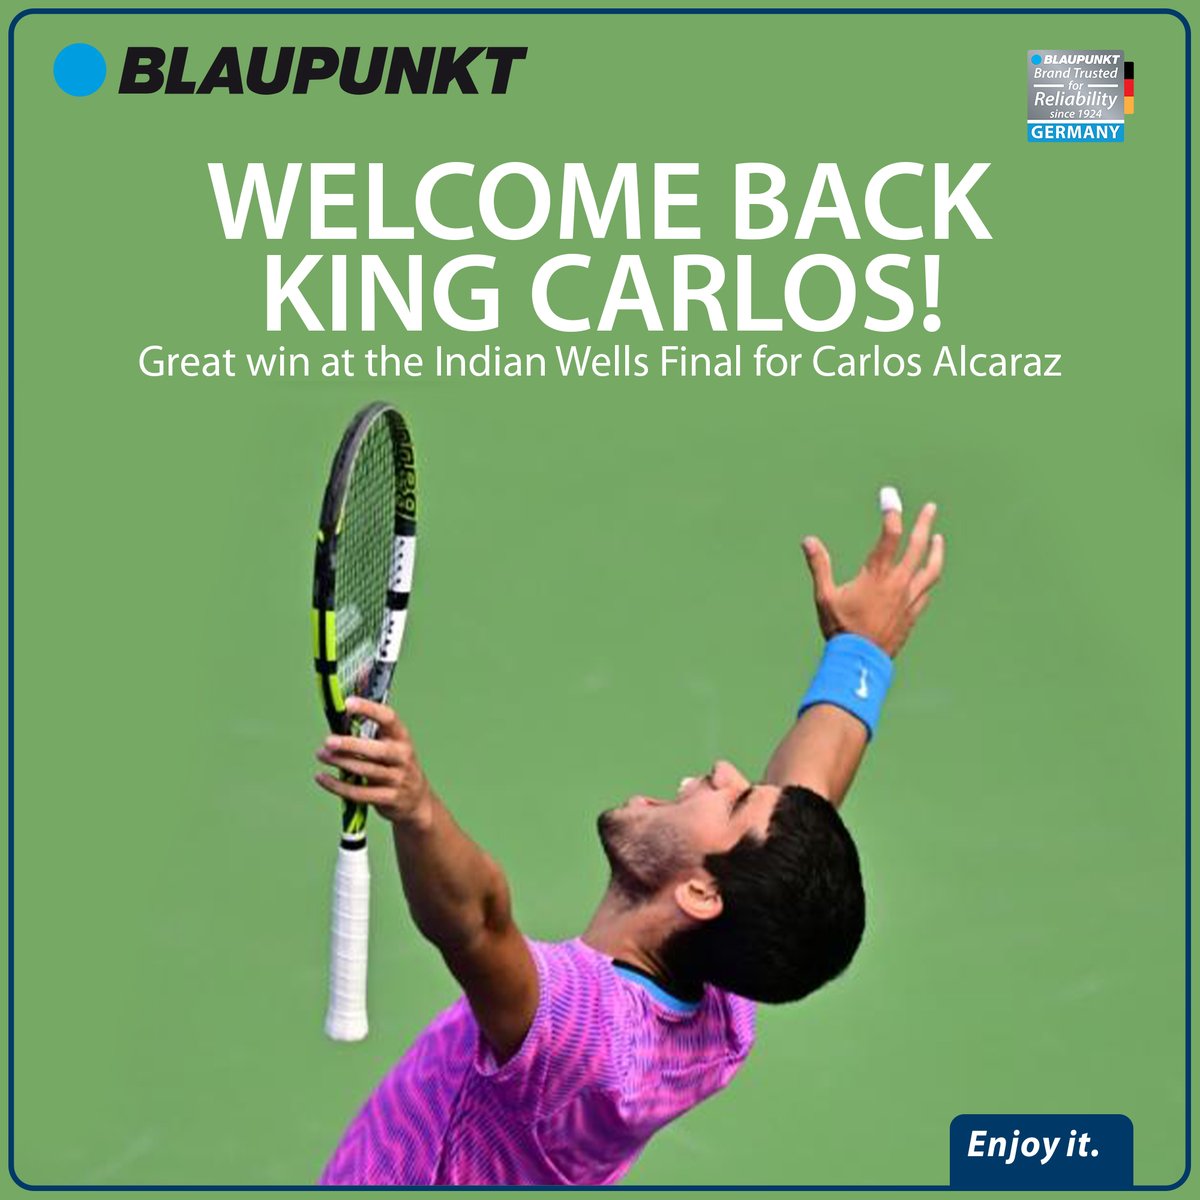 Welcome back to the top @carlosalcaraz ! It was all uphill but you showed your class to walk away as the champion at the Indian Wells tournament. We see lots of great action from you in the future! #tennis #carlos #sports